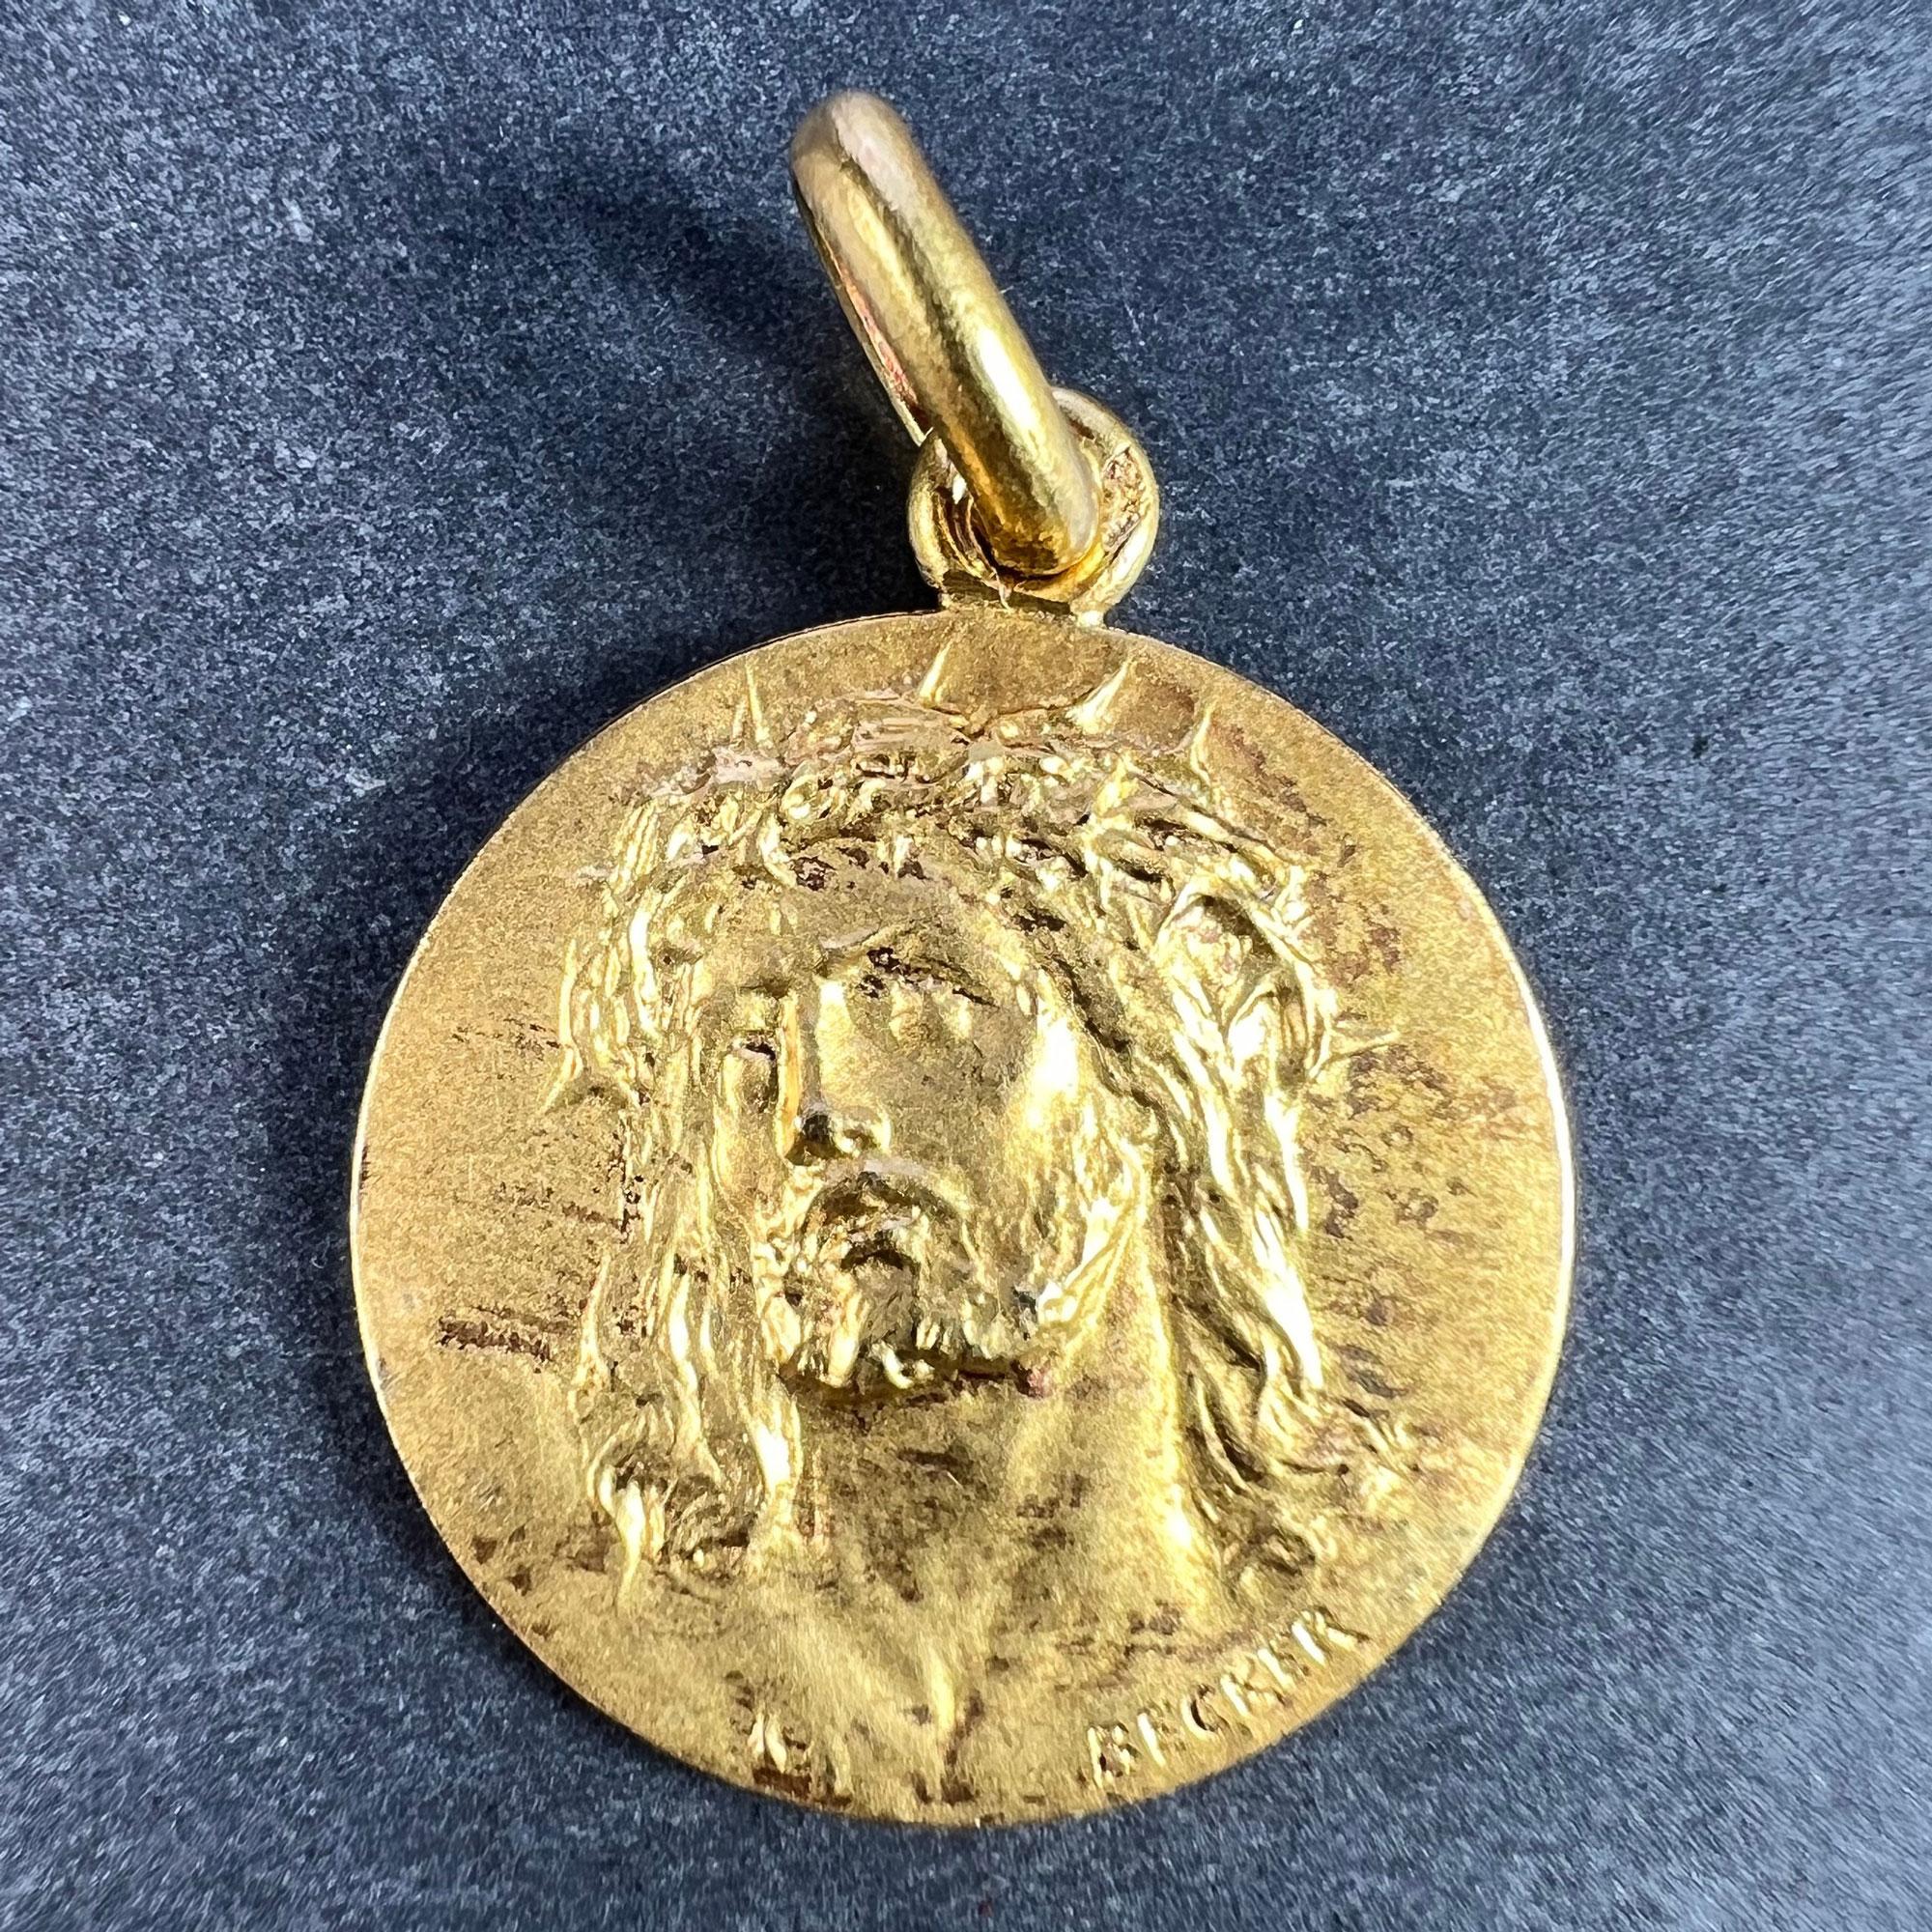 A French 18 karat (18K) yellow gold charm pendant designed as a round medal depicting Jesus Christ wearing the Crown of Thorns. Signed Becker, stamped with the eagle’s head for 18 karat gold and French manufacture, along with an unknown maker's